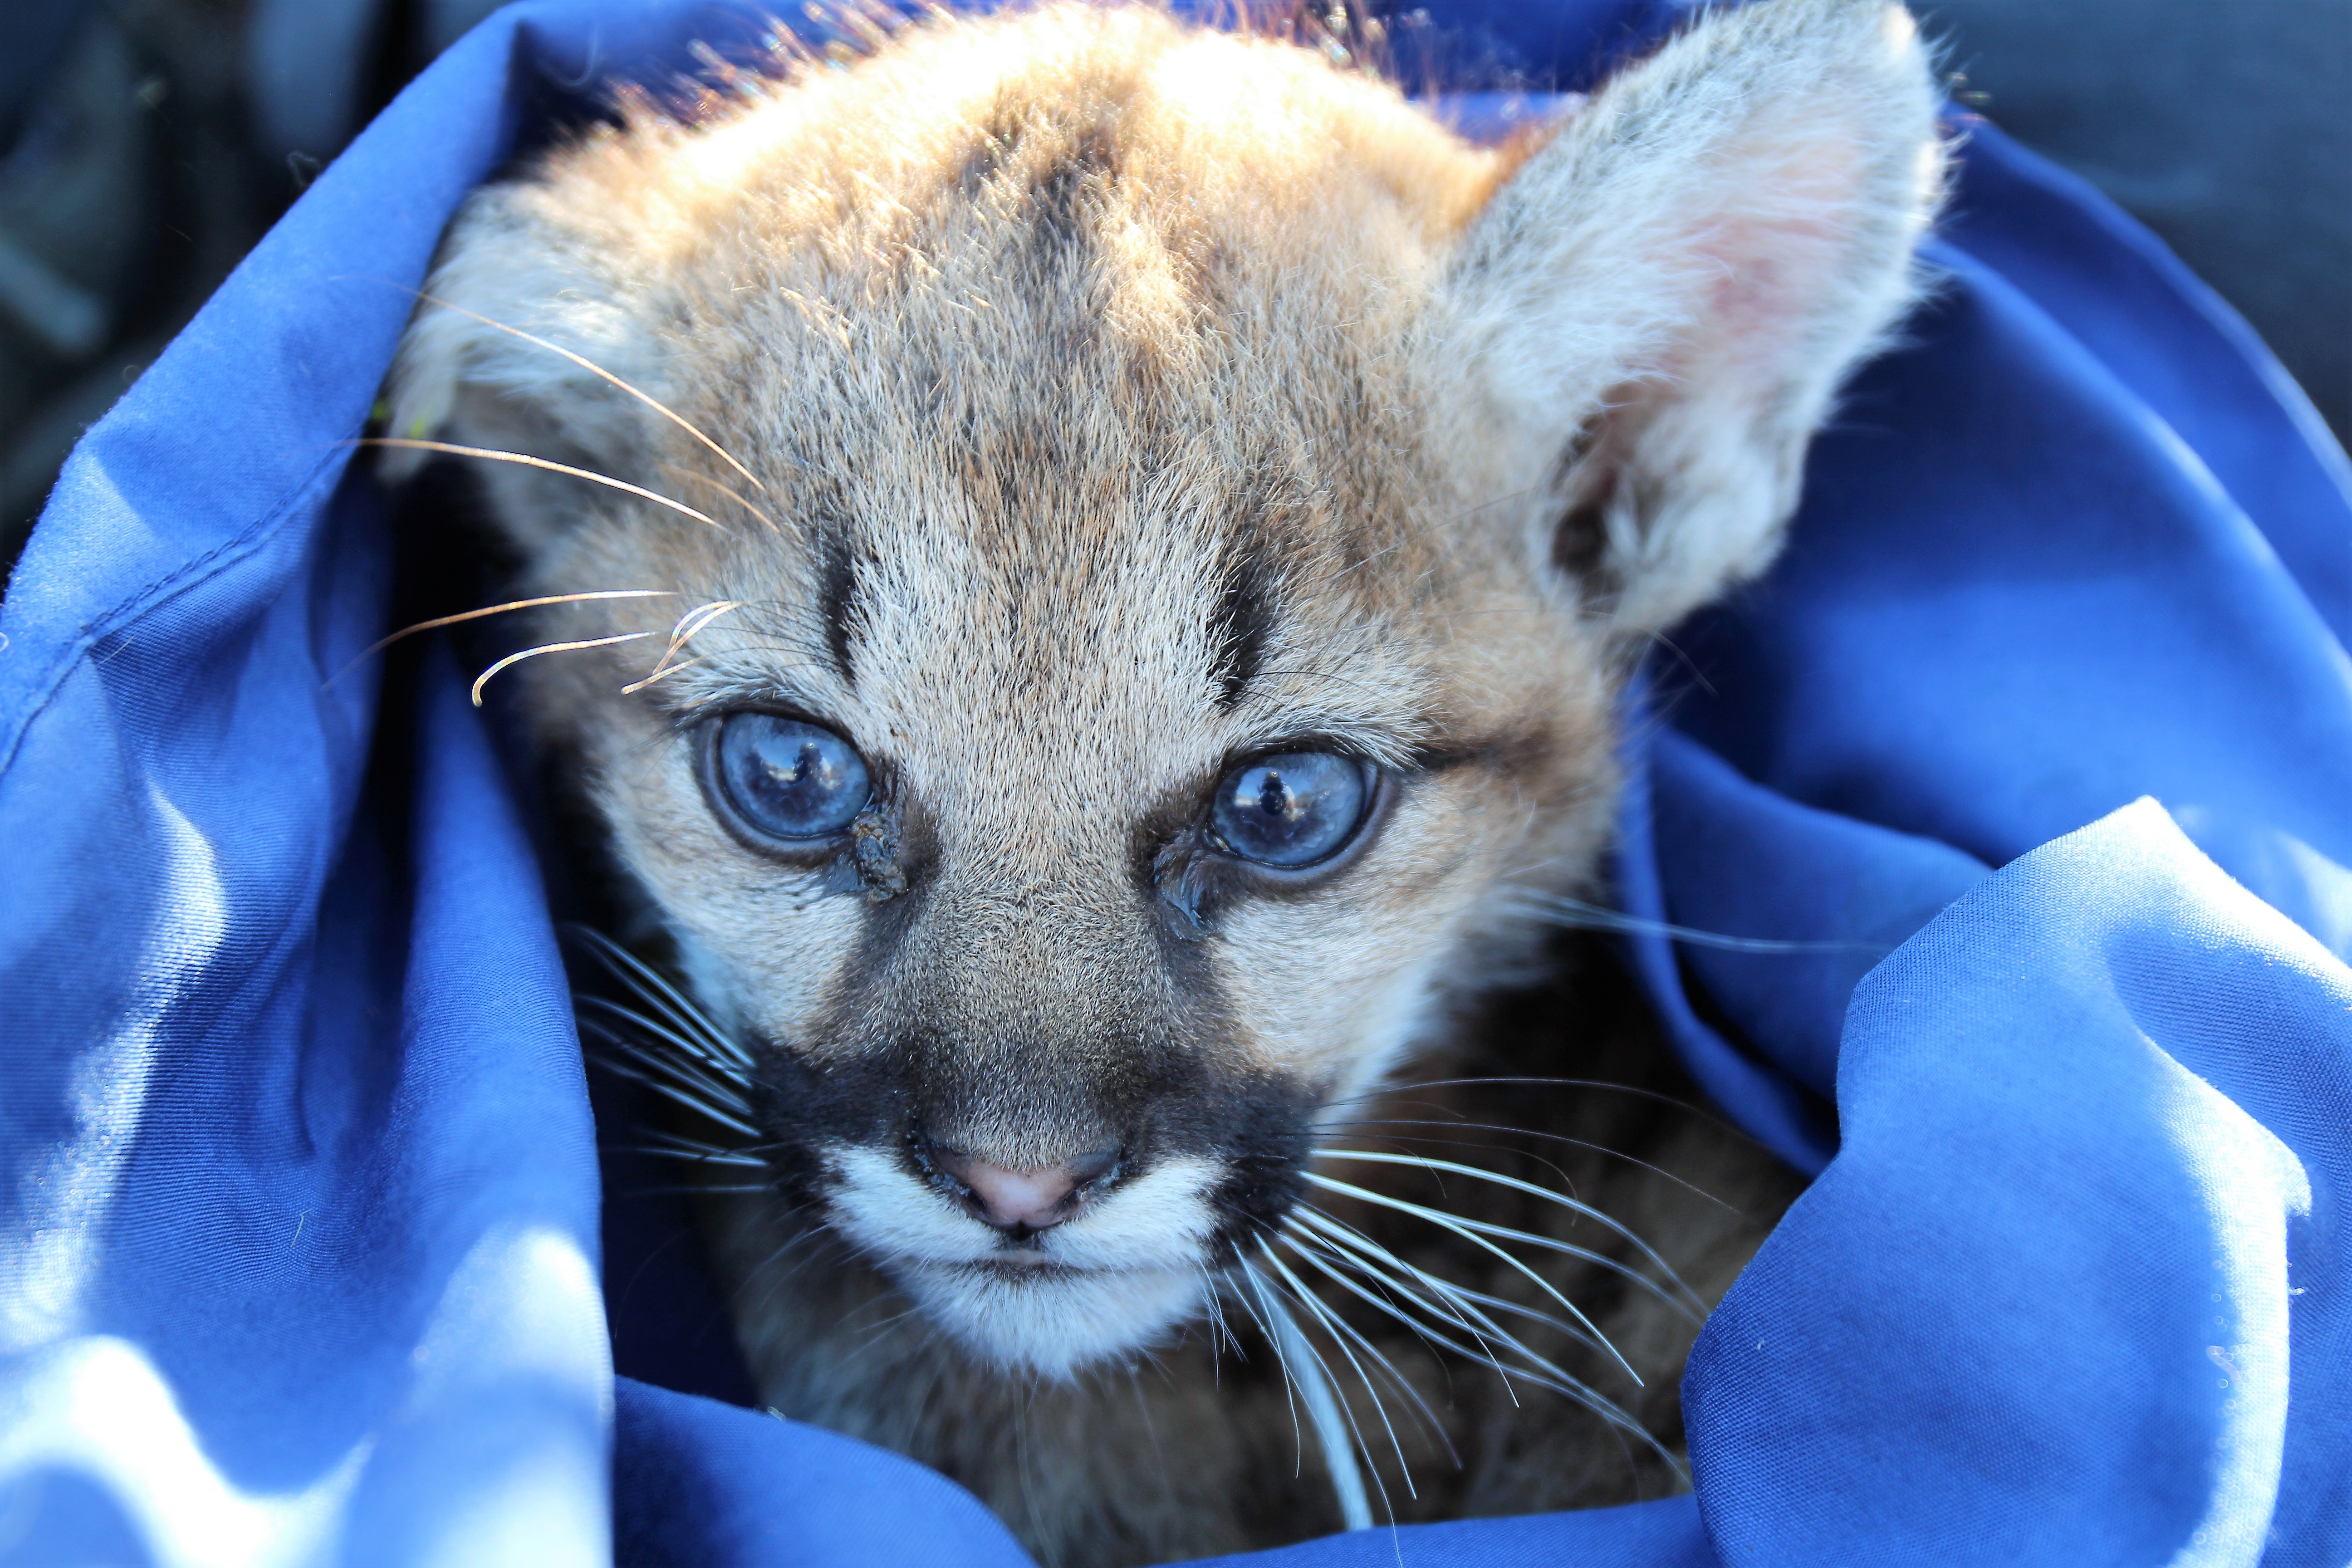 P-102 was a six-month old mountain lion kitten. Anticoagulant rodenticide was found in her body.